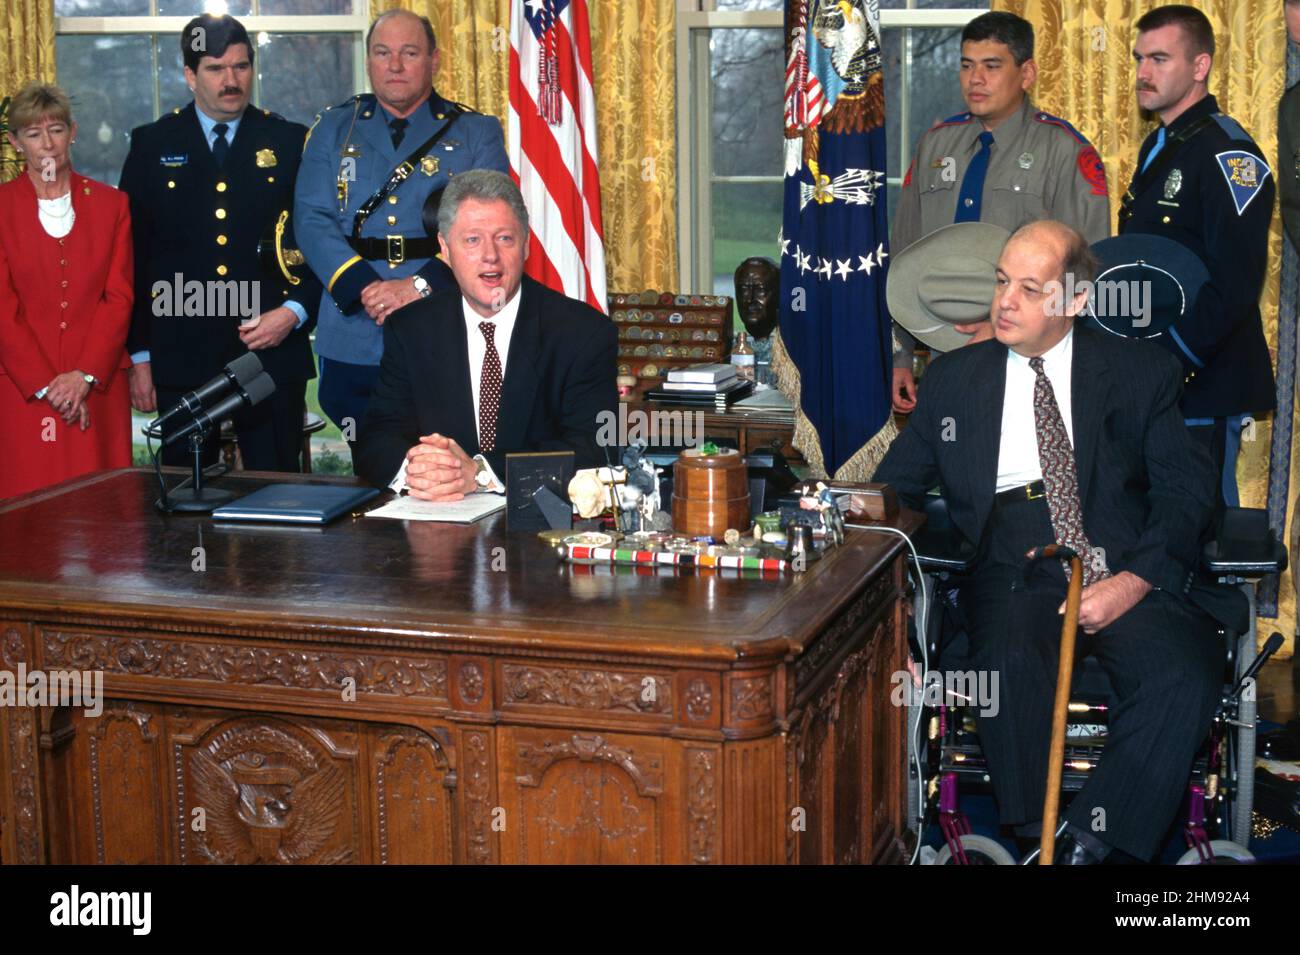 U.S. President Bill Clinton, joined by James Brady, right, Rep. Carolyn McCarthy, left, and members of law enforcement for the signing of a directive on child safety gun locks from the Oval Office of the White House, March 5, 1997 in Washington, D.C. Stock Photo